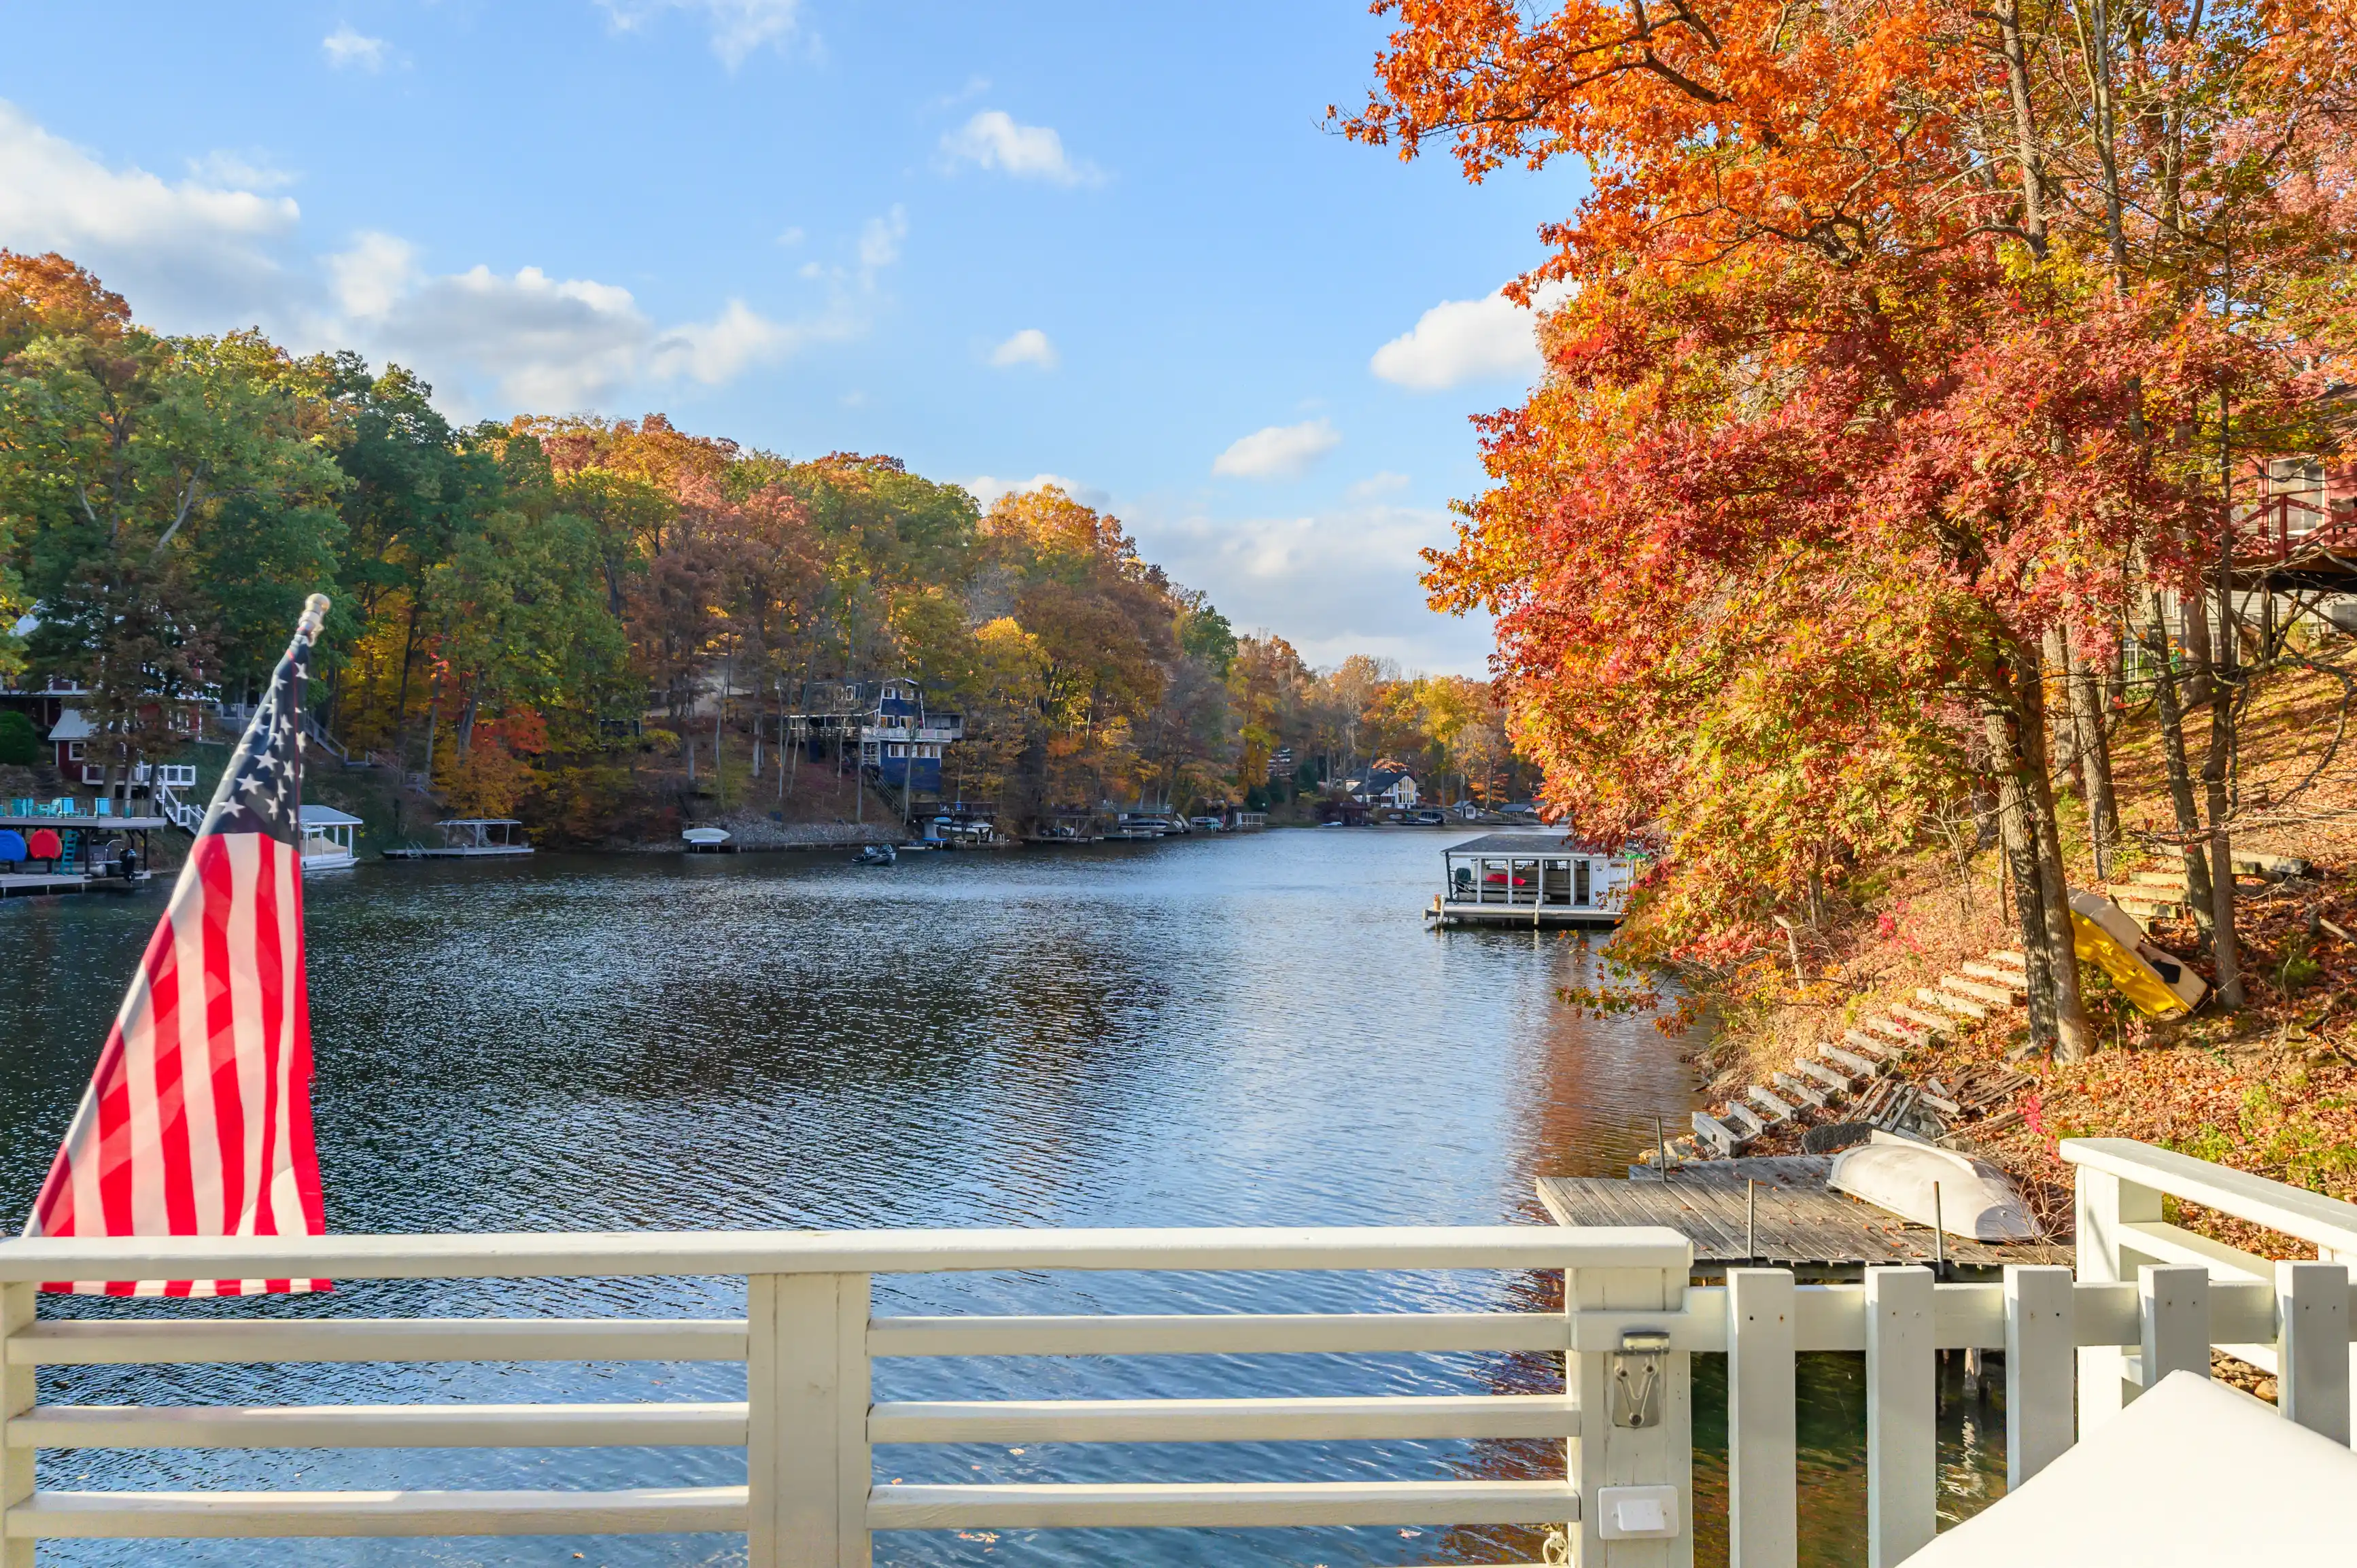 A serene autumn lakeside view with colorful trees, an American flag in the foreground, and houses dotted along the shore.